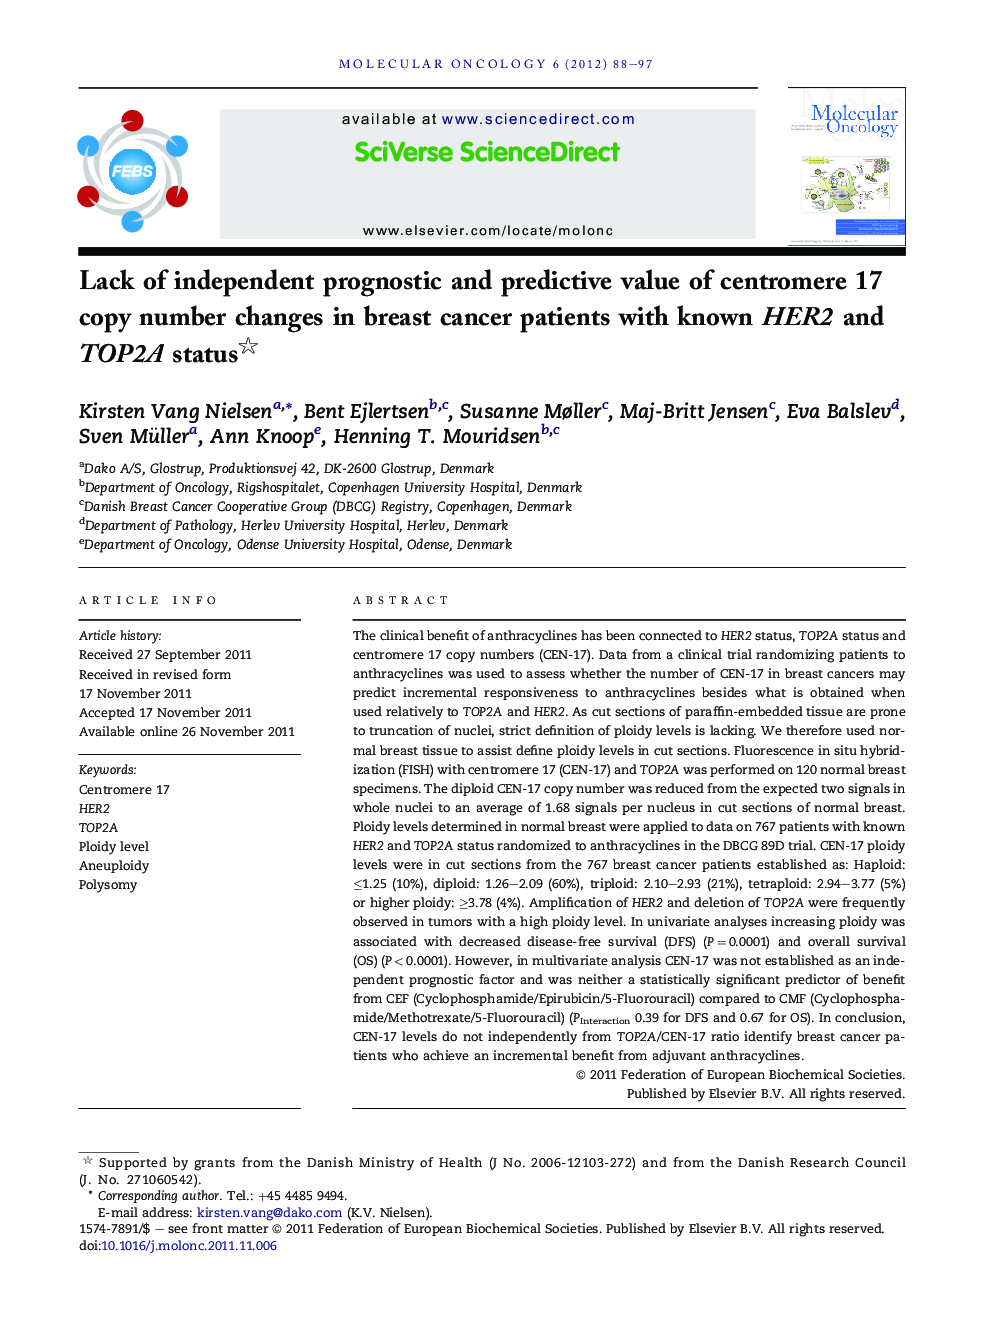 Lack of independent prognostic and predictive value of centromere 17 copy number changes in breast cancer patients with known HER2 and TOP2A status 